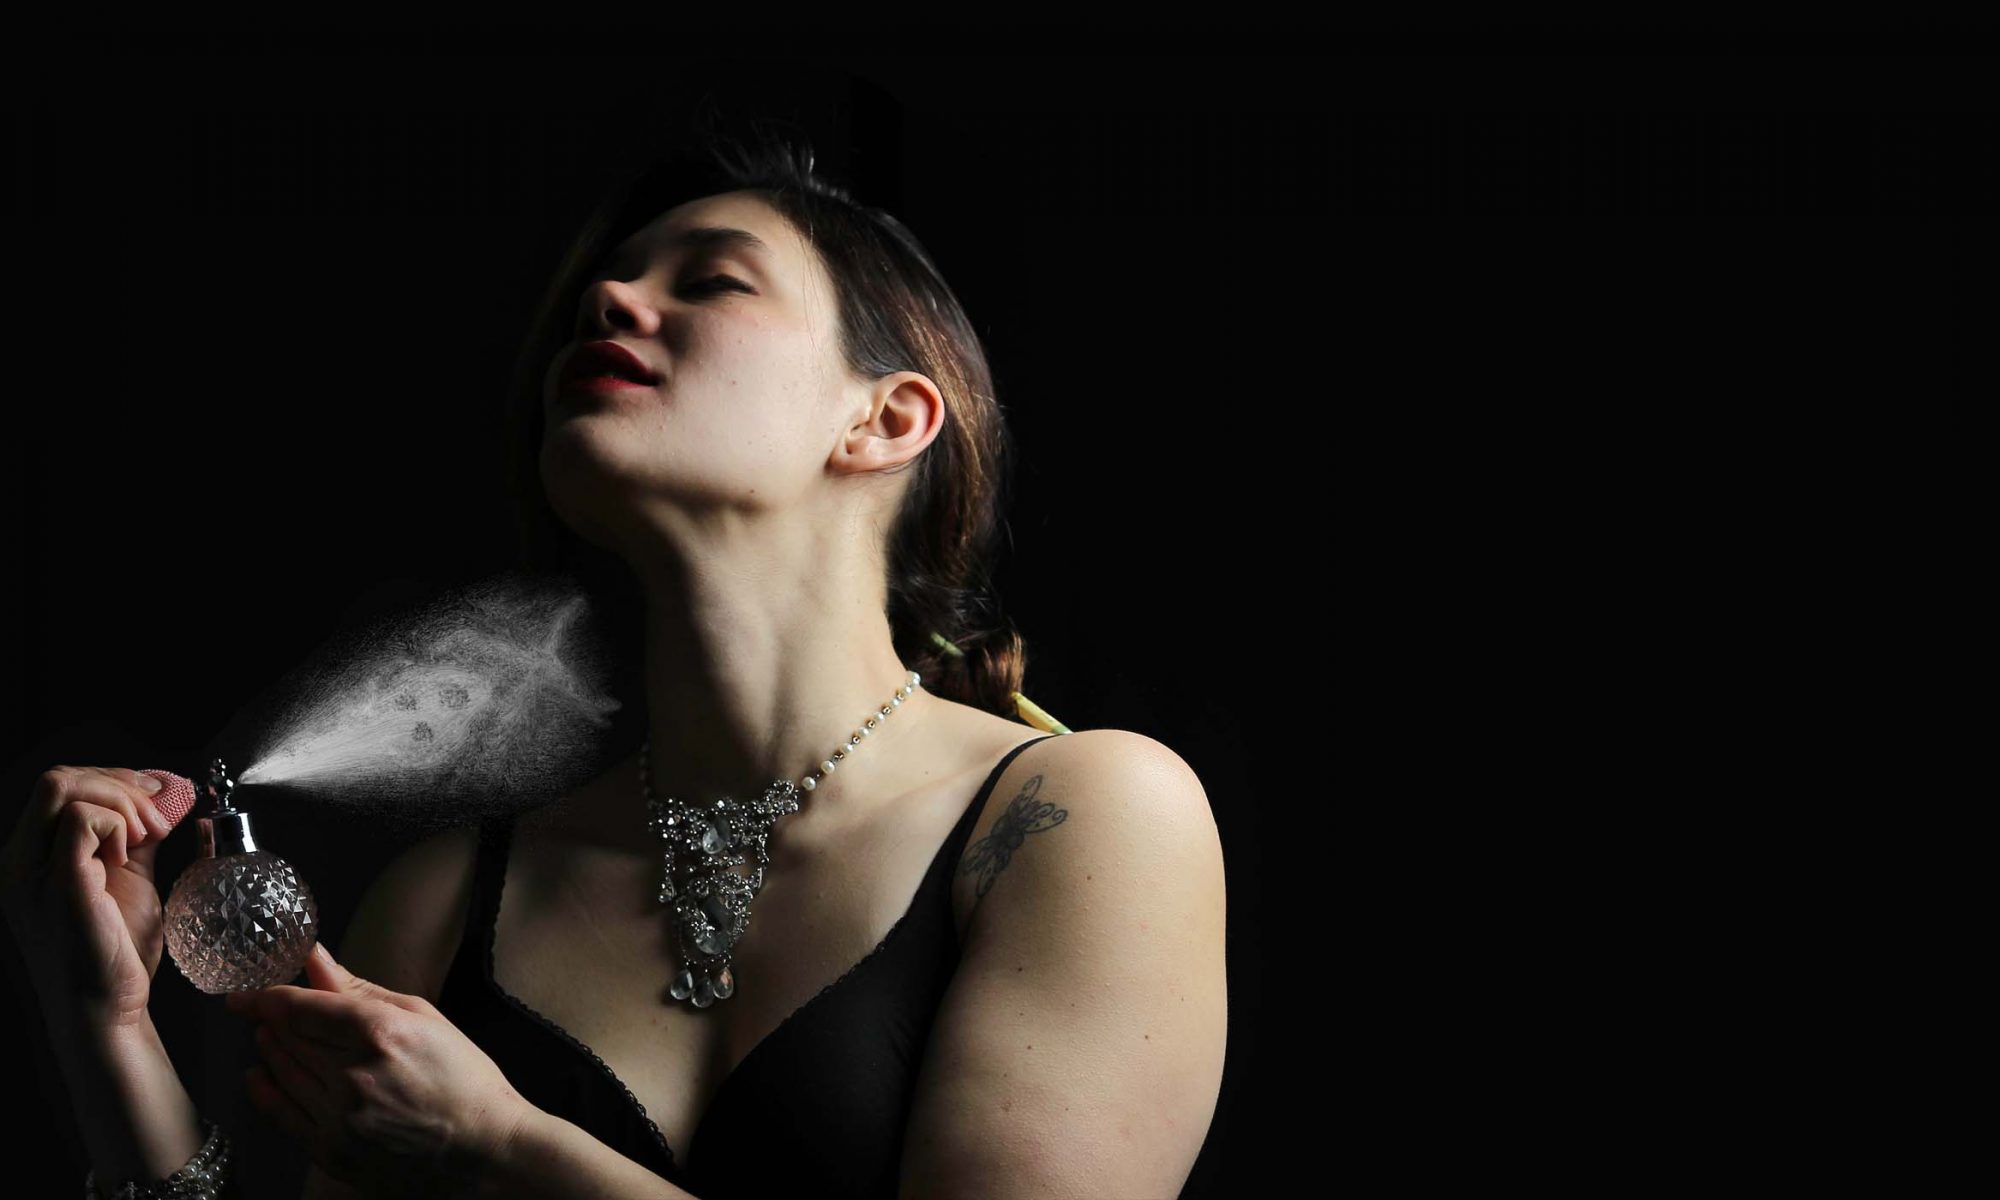 Woman spraying perfume cloud at herself in the shape of a skull and cross bones.